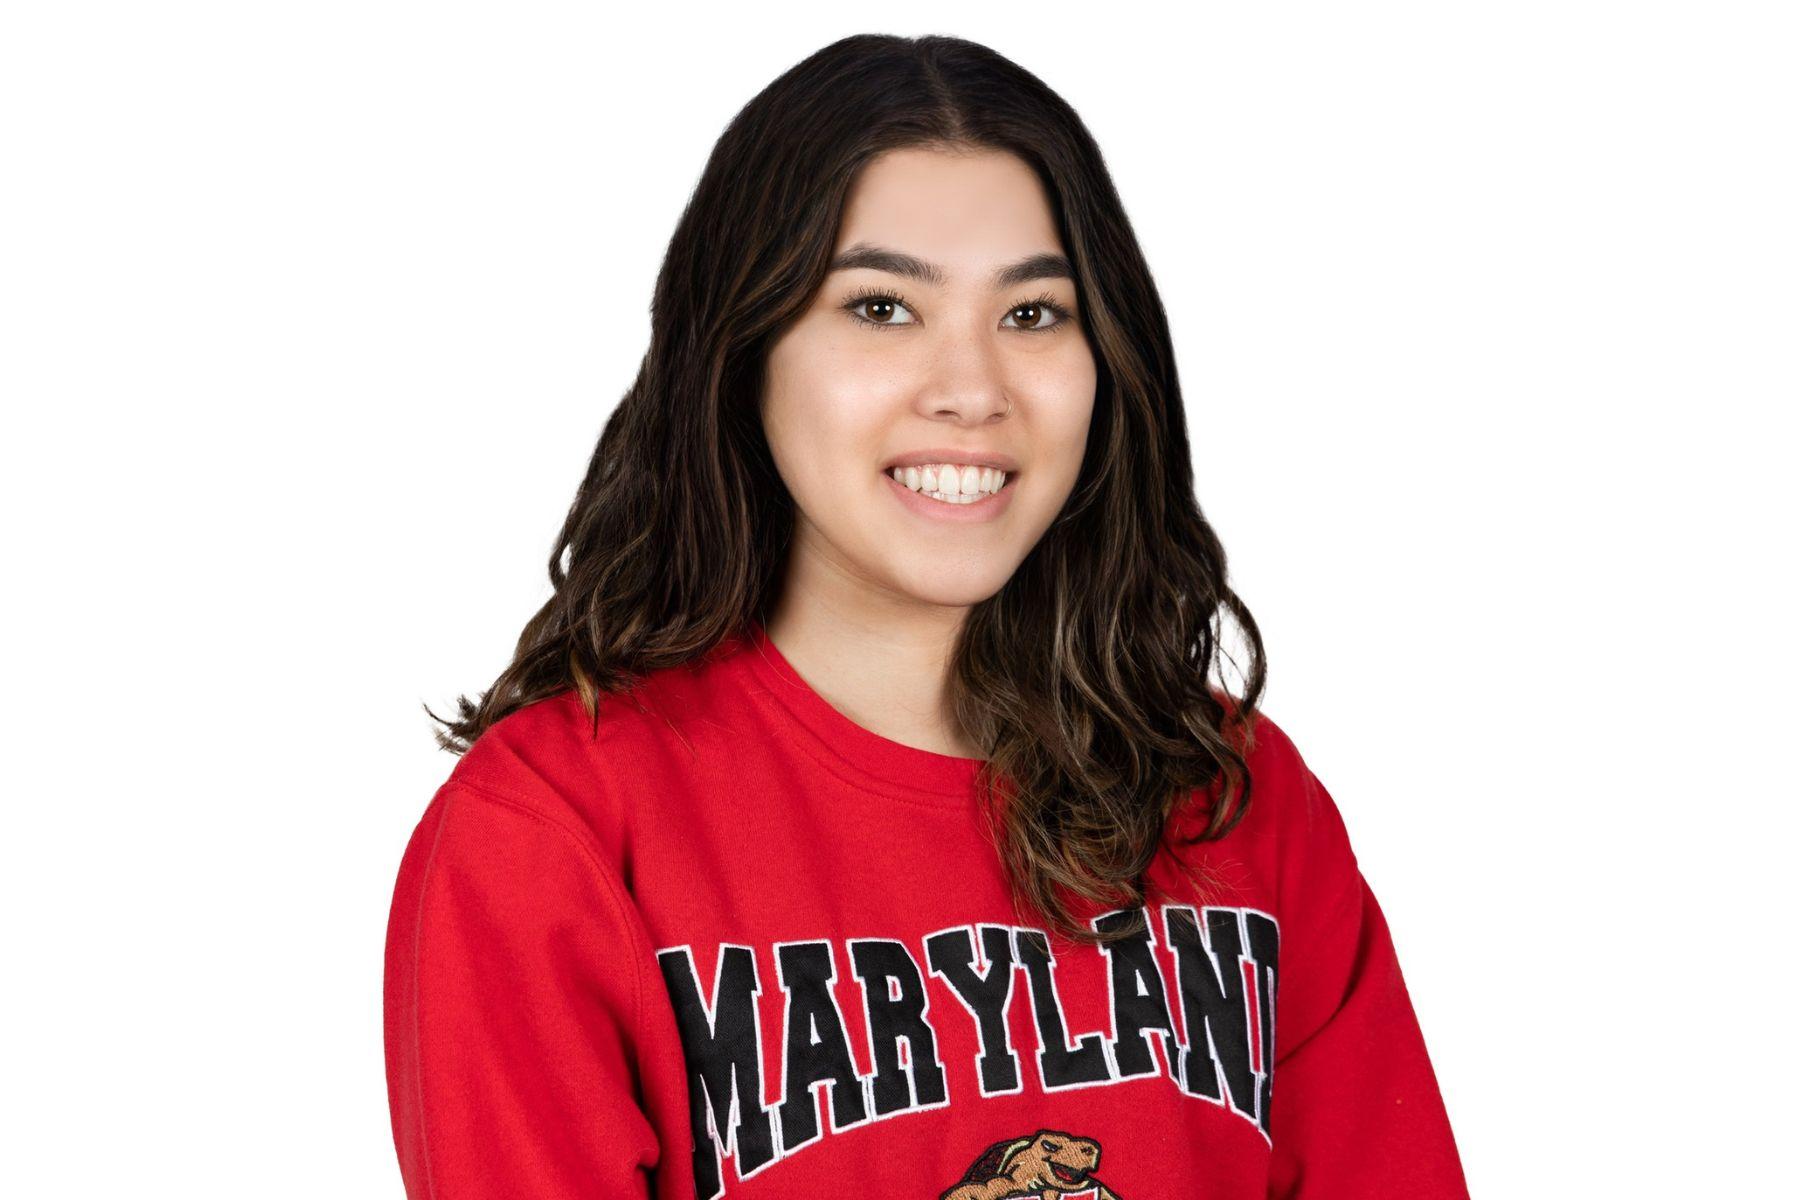 Rosie is wearing a red Maryland sweatshirt and is smiling at the camera